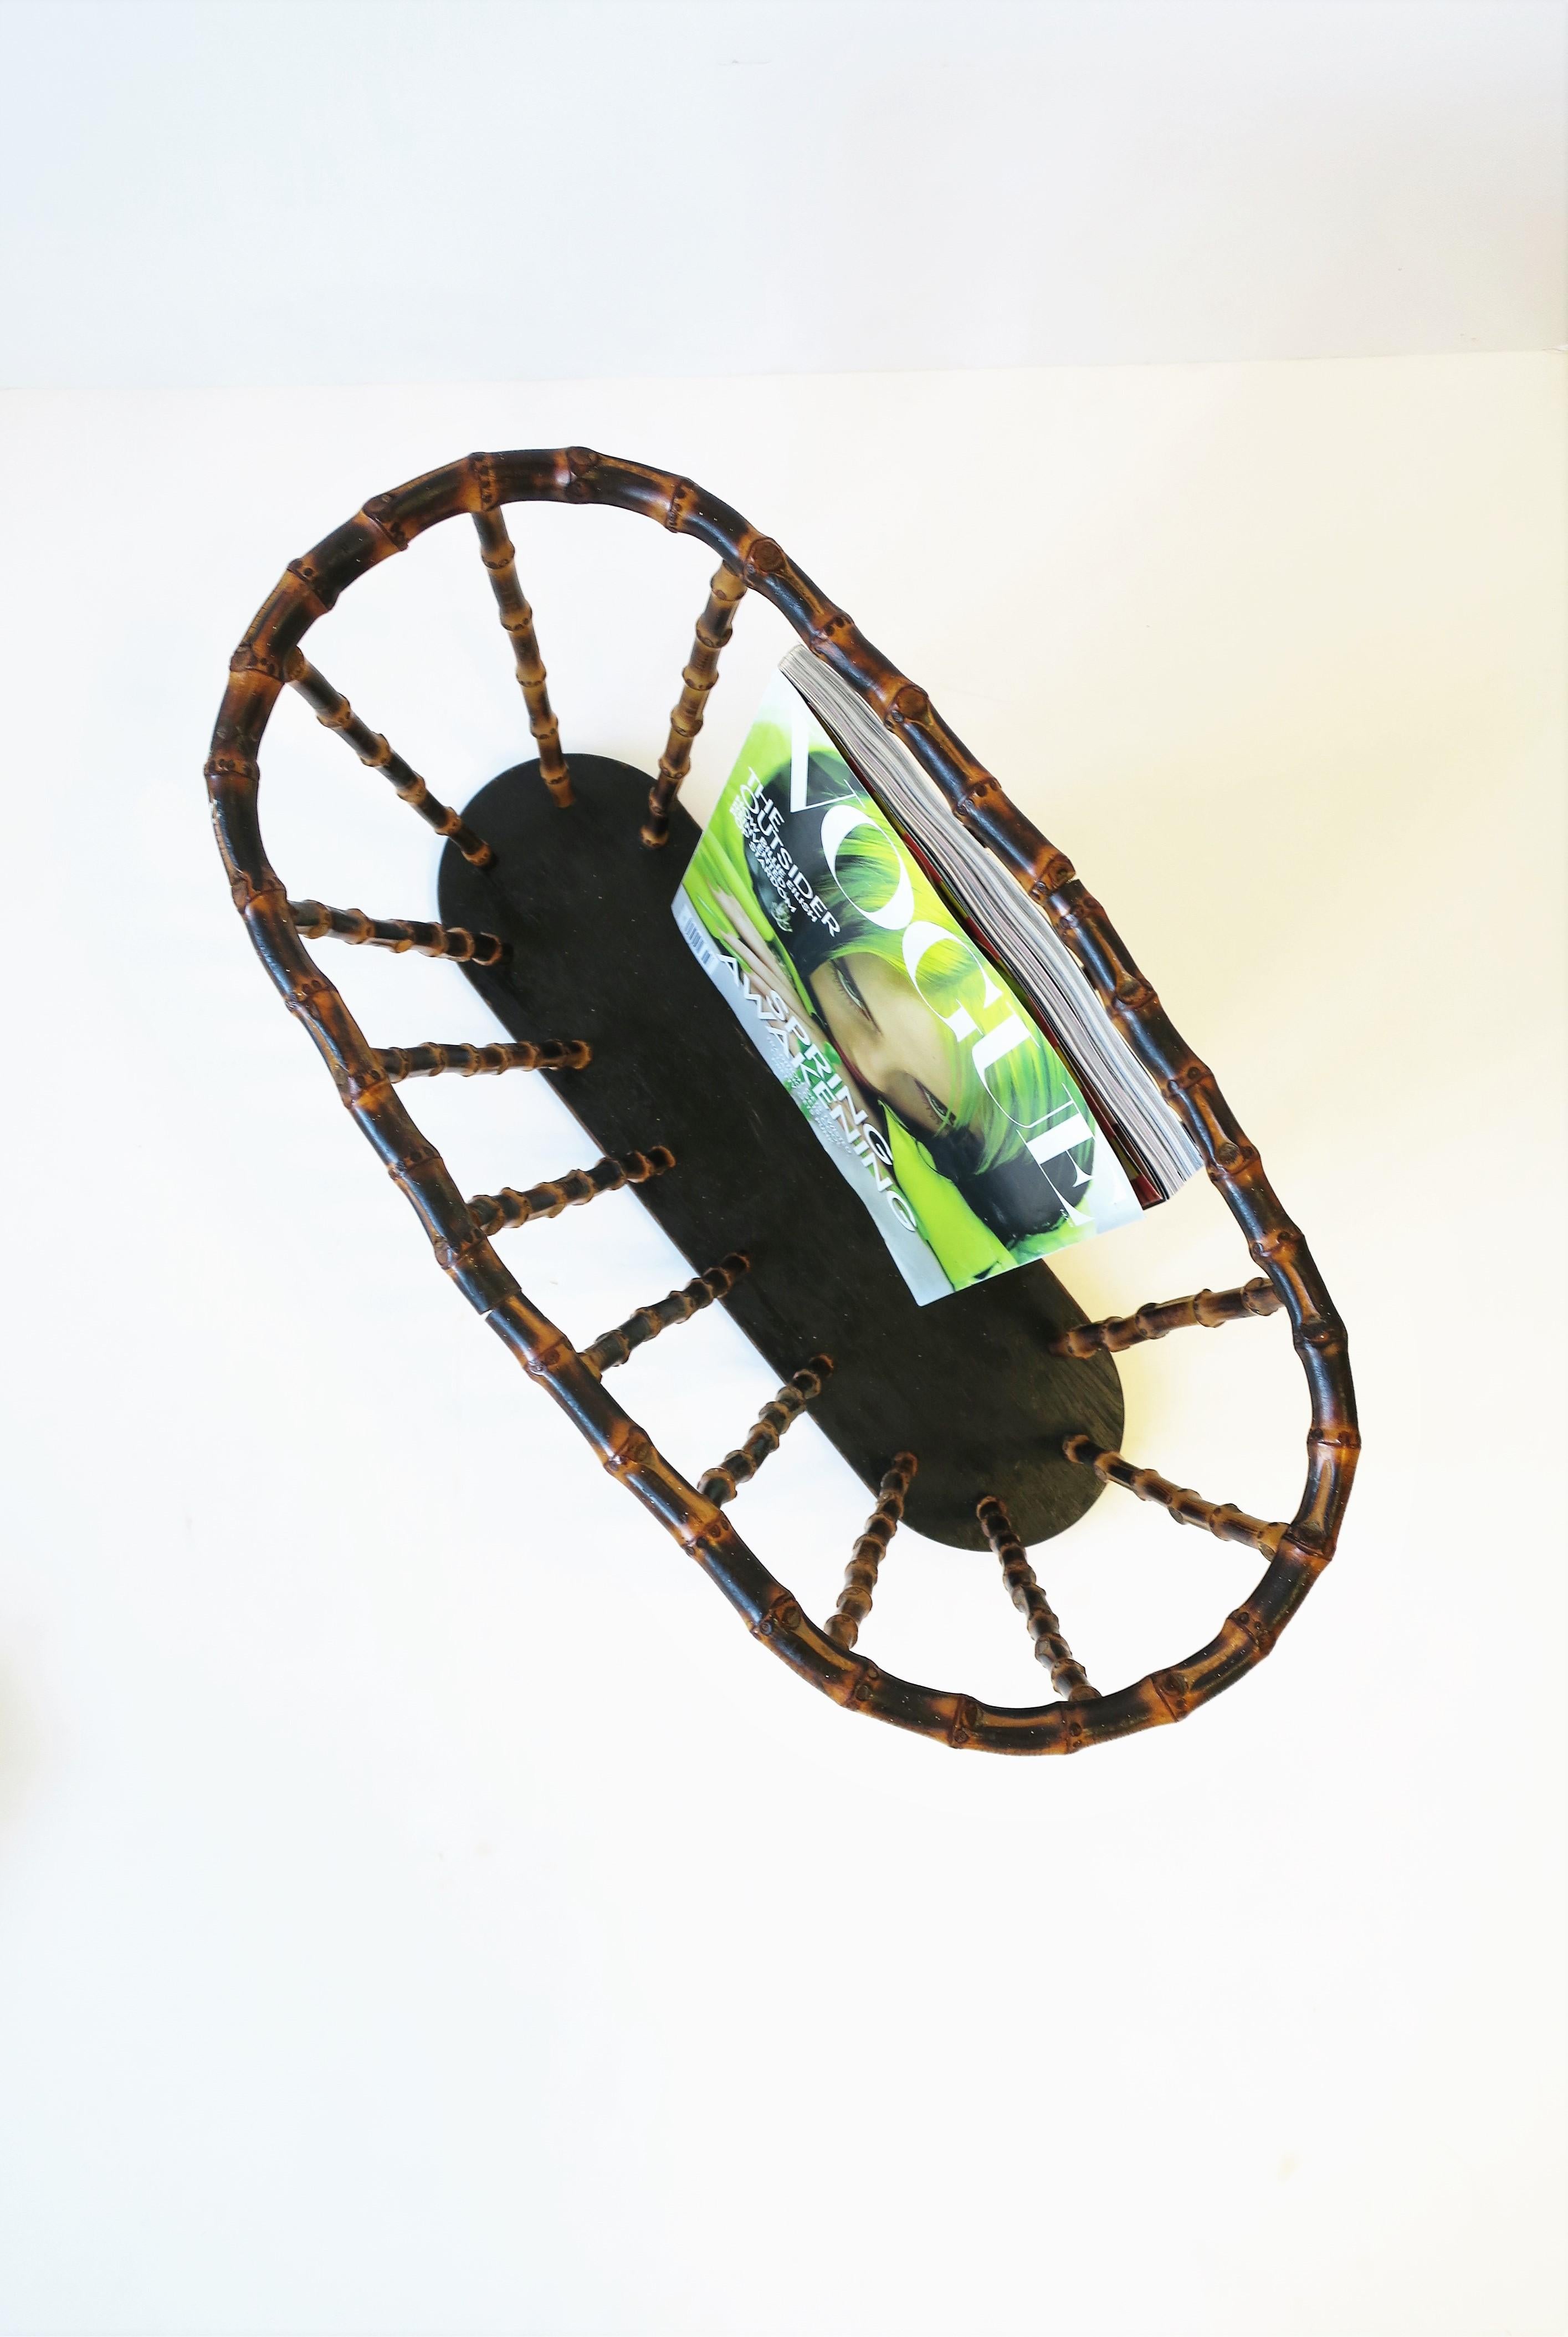 Bamboo Magazine or Newspaper Holder Stand Rack Basket in the style of Gucci 5